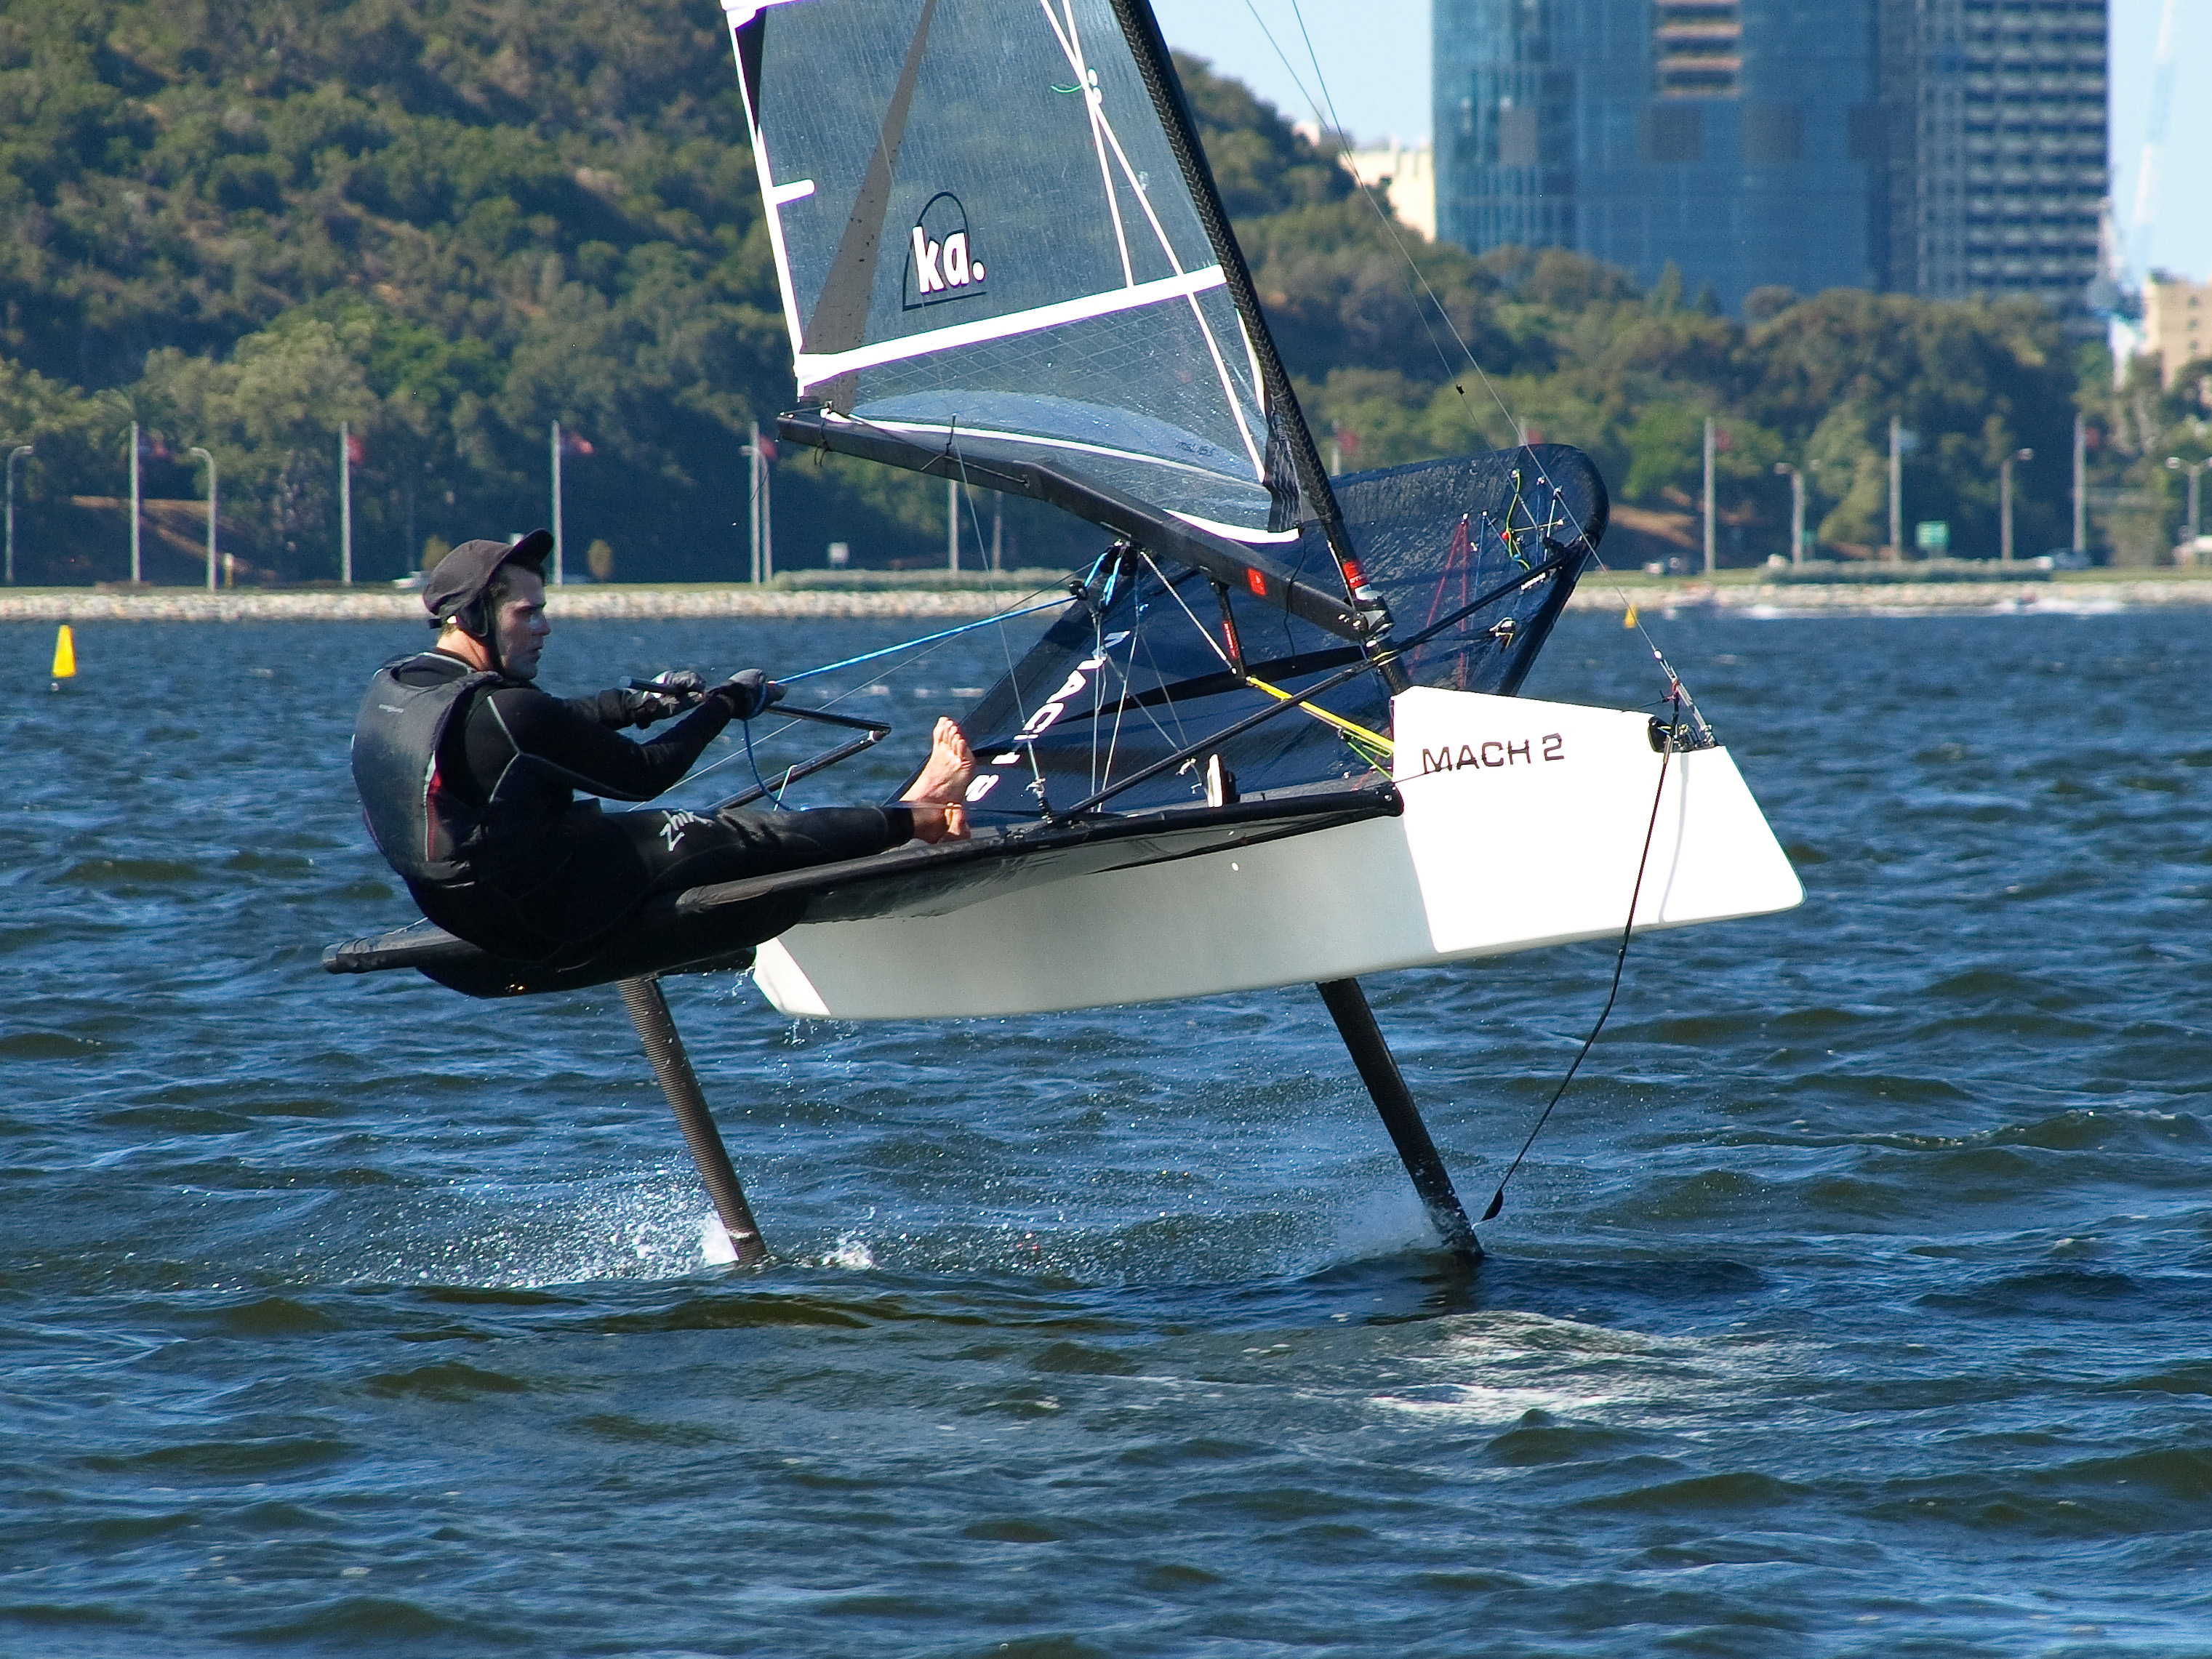 Perth’s Mounts Bay Sailing Club to host 2019 Moth Worlds